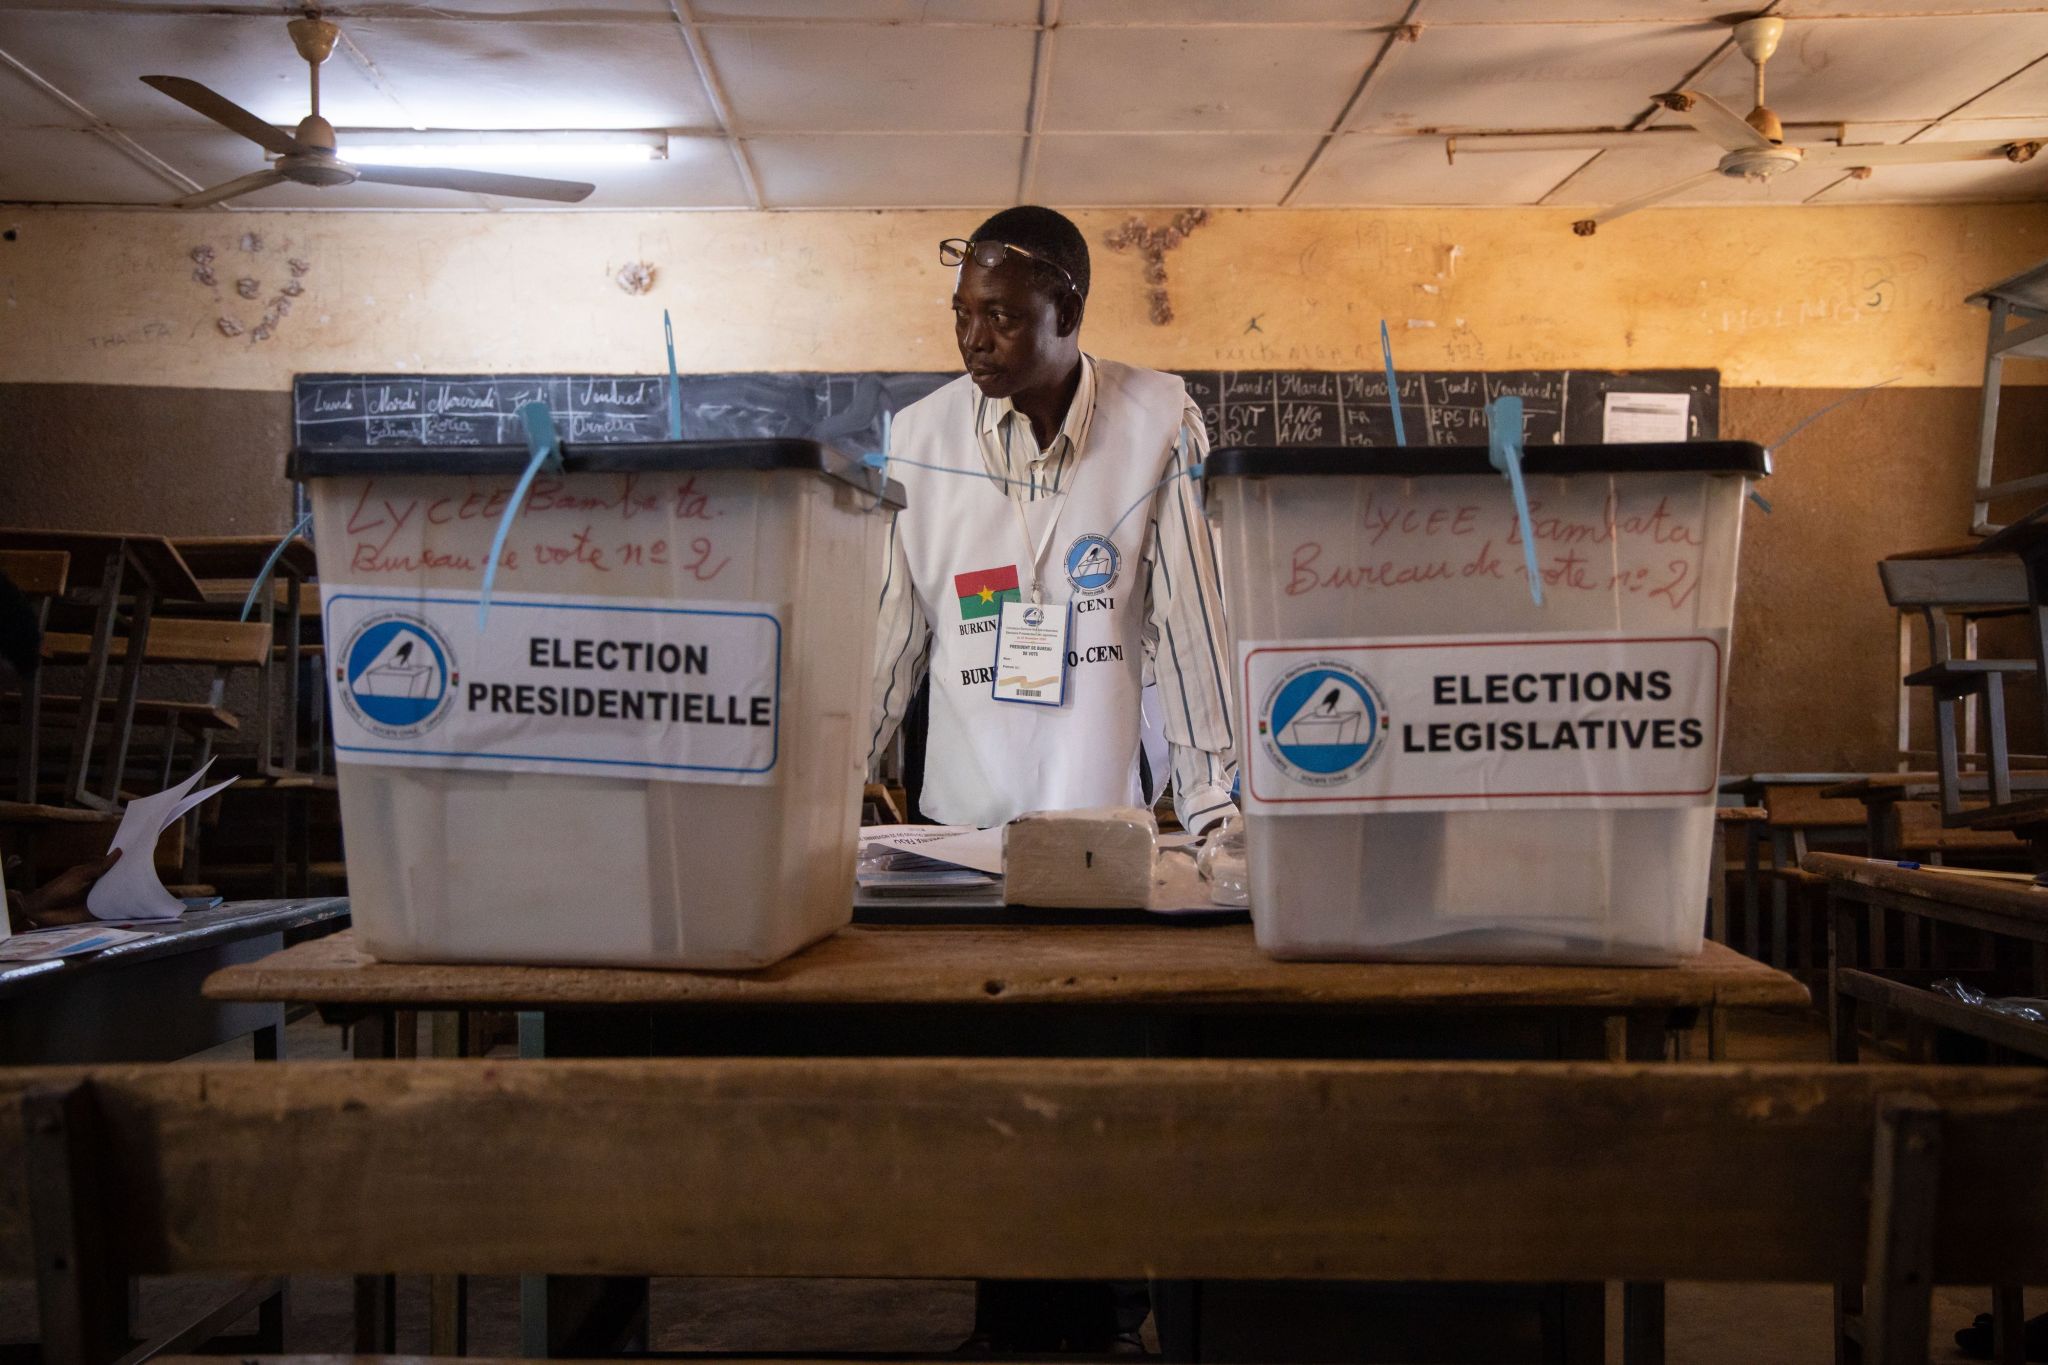 A man stands in-between two ballot boxes